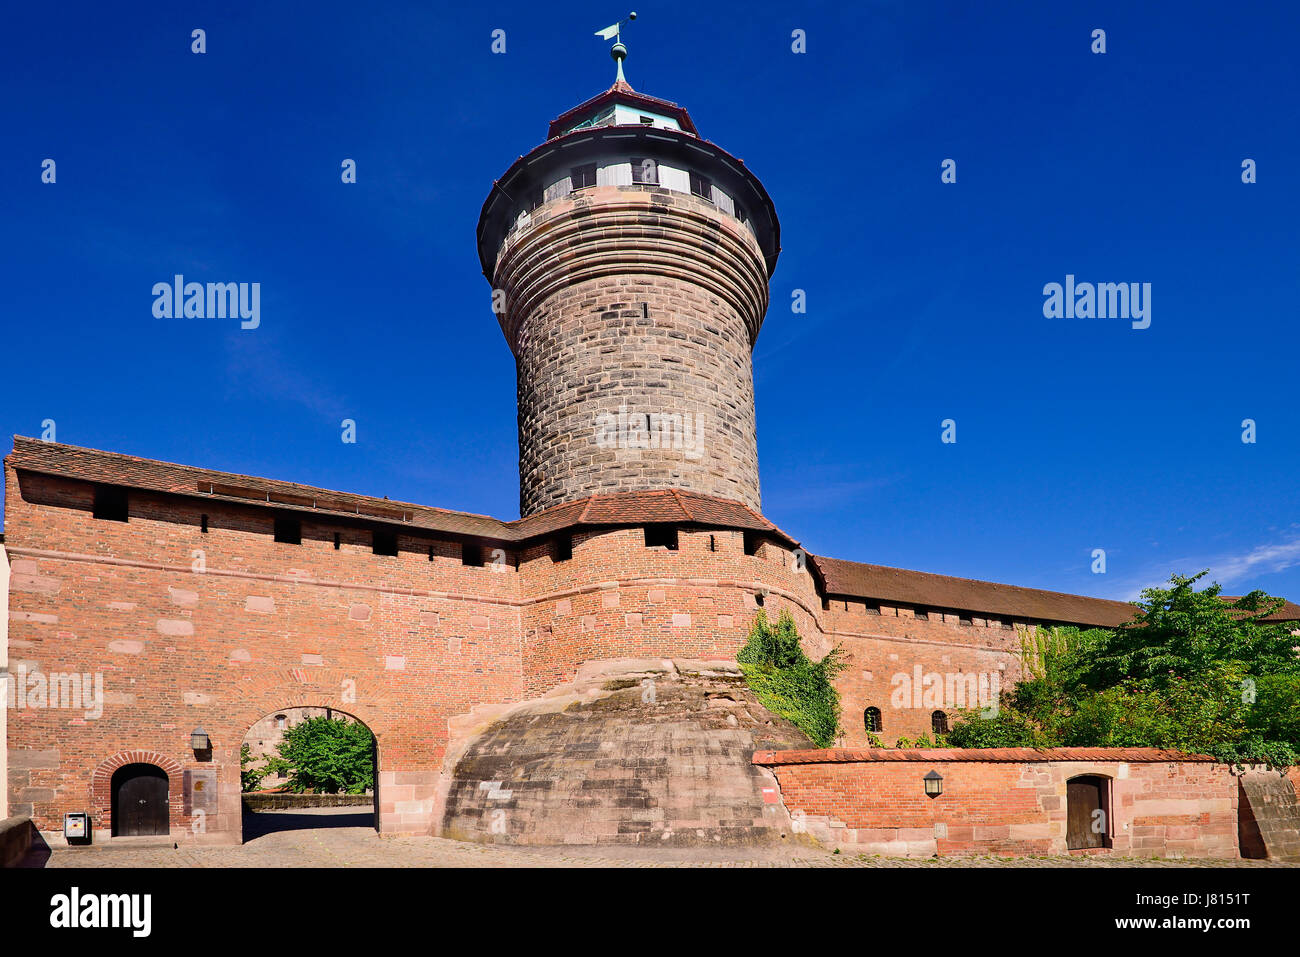 Germany, Bavaria, Nuremberg, Kaiserburg or Imperial Castle, Entrance Gate and Sinwell Tower. Stock Photo